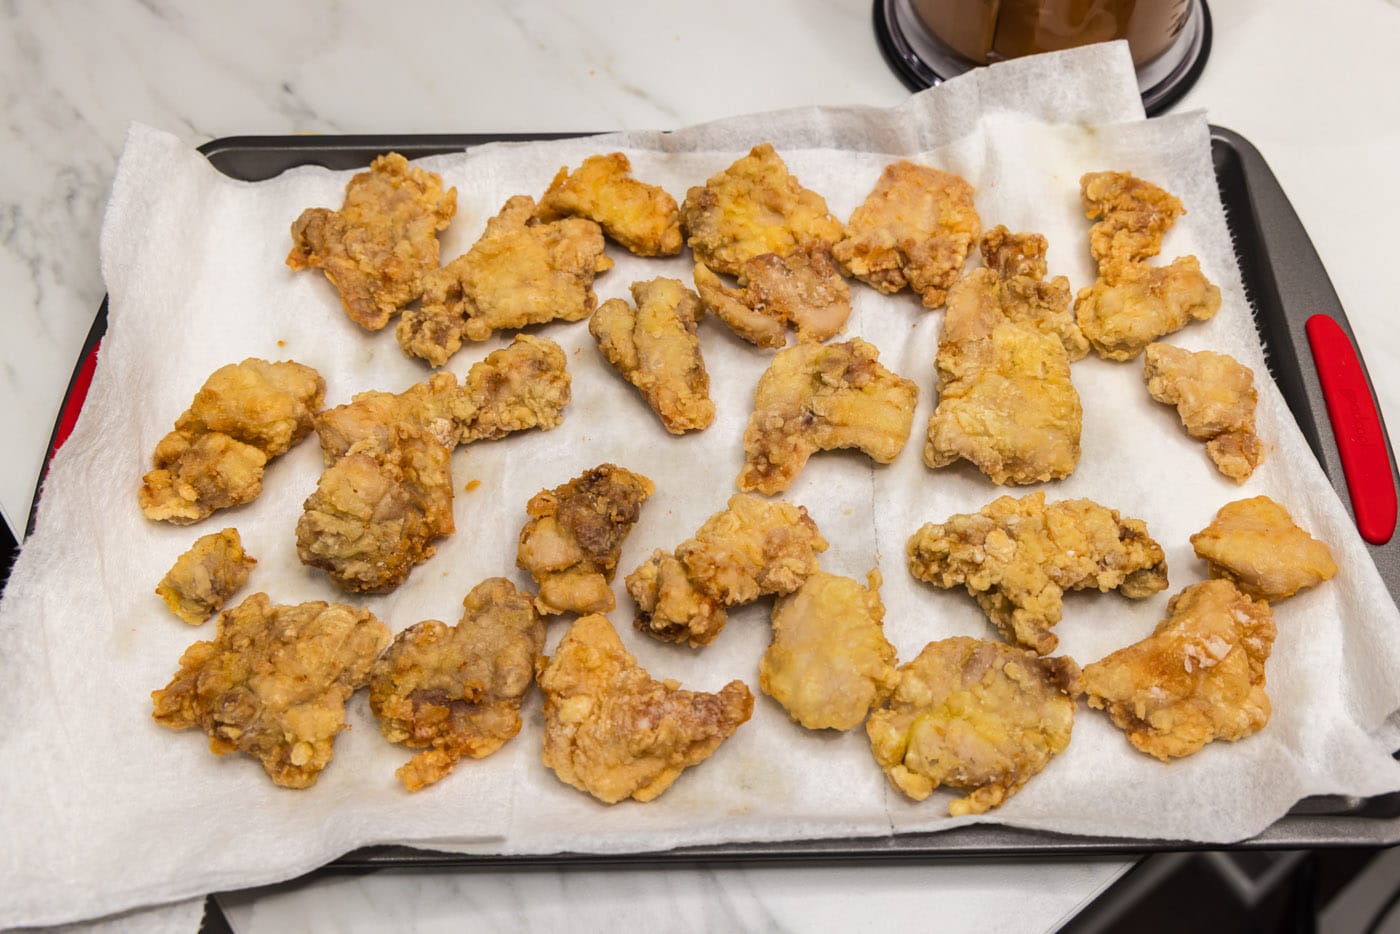 crispy coated chicken pieces on a paper towel